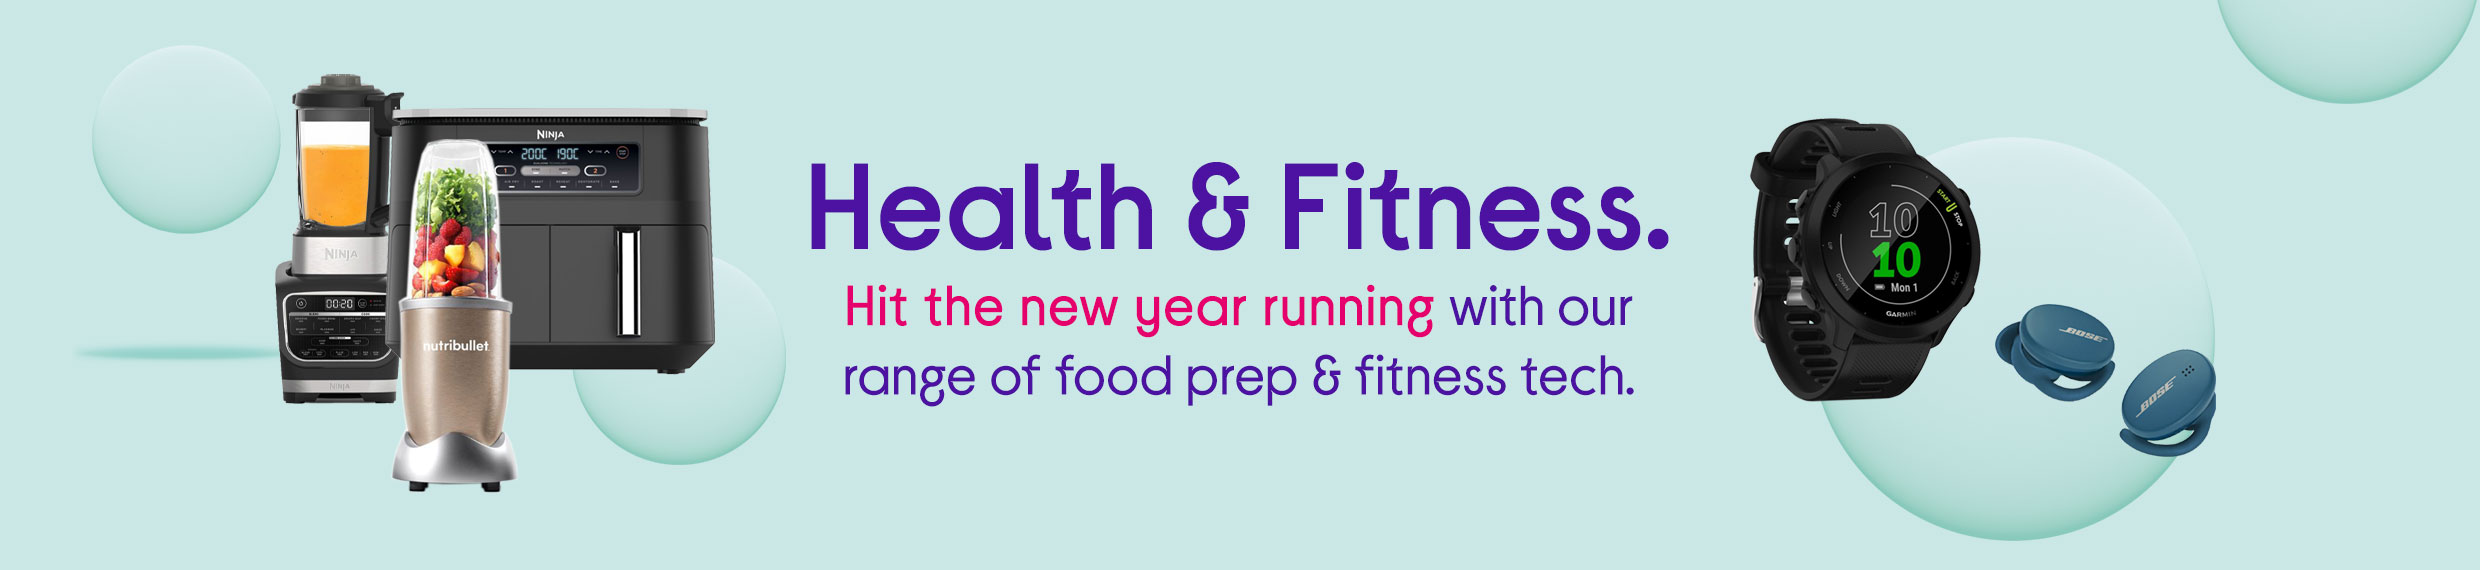 Tech for fitness, healthy eating and living